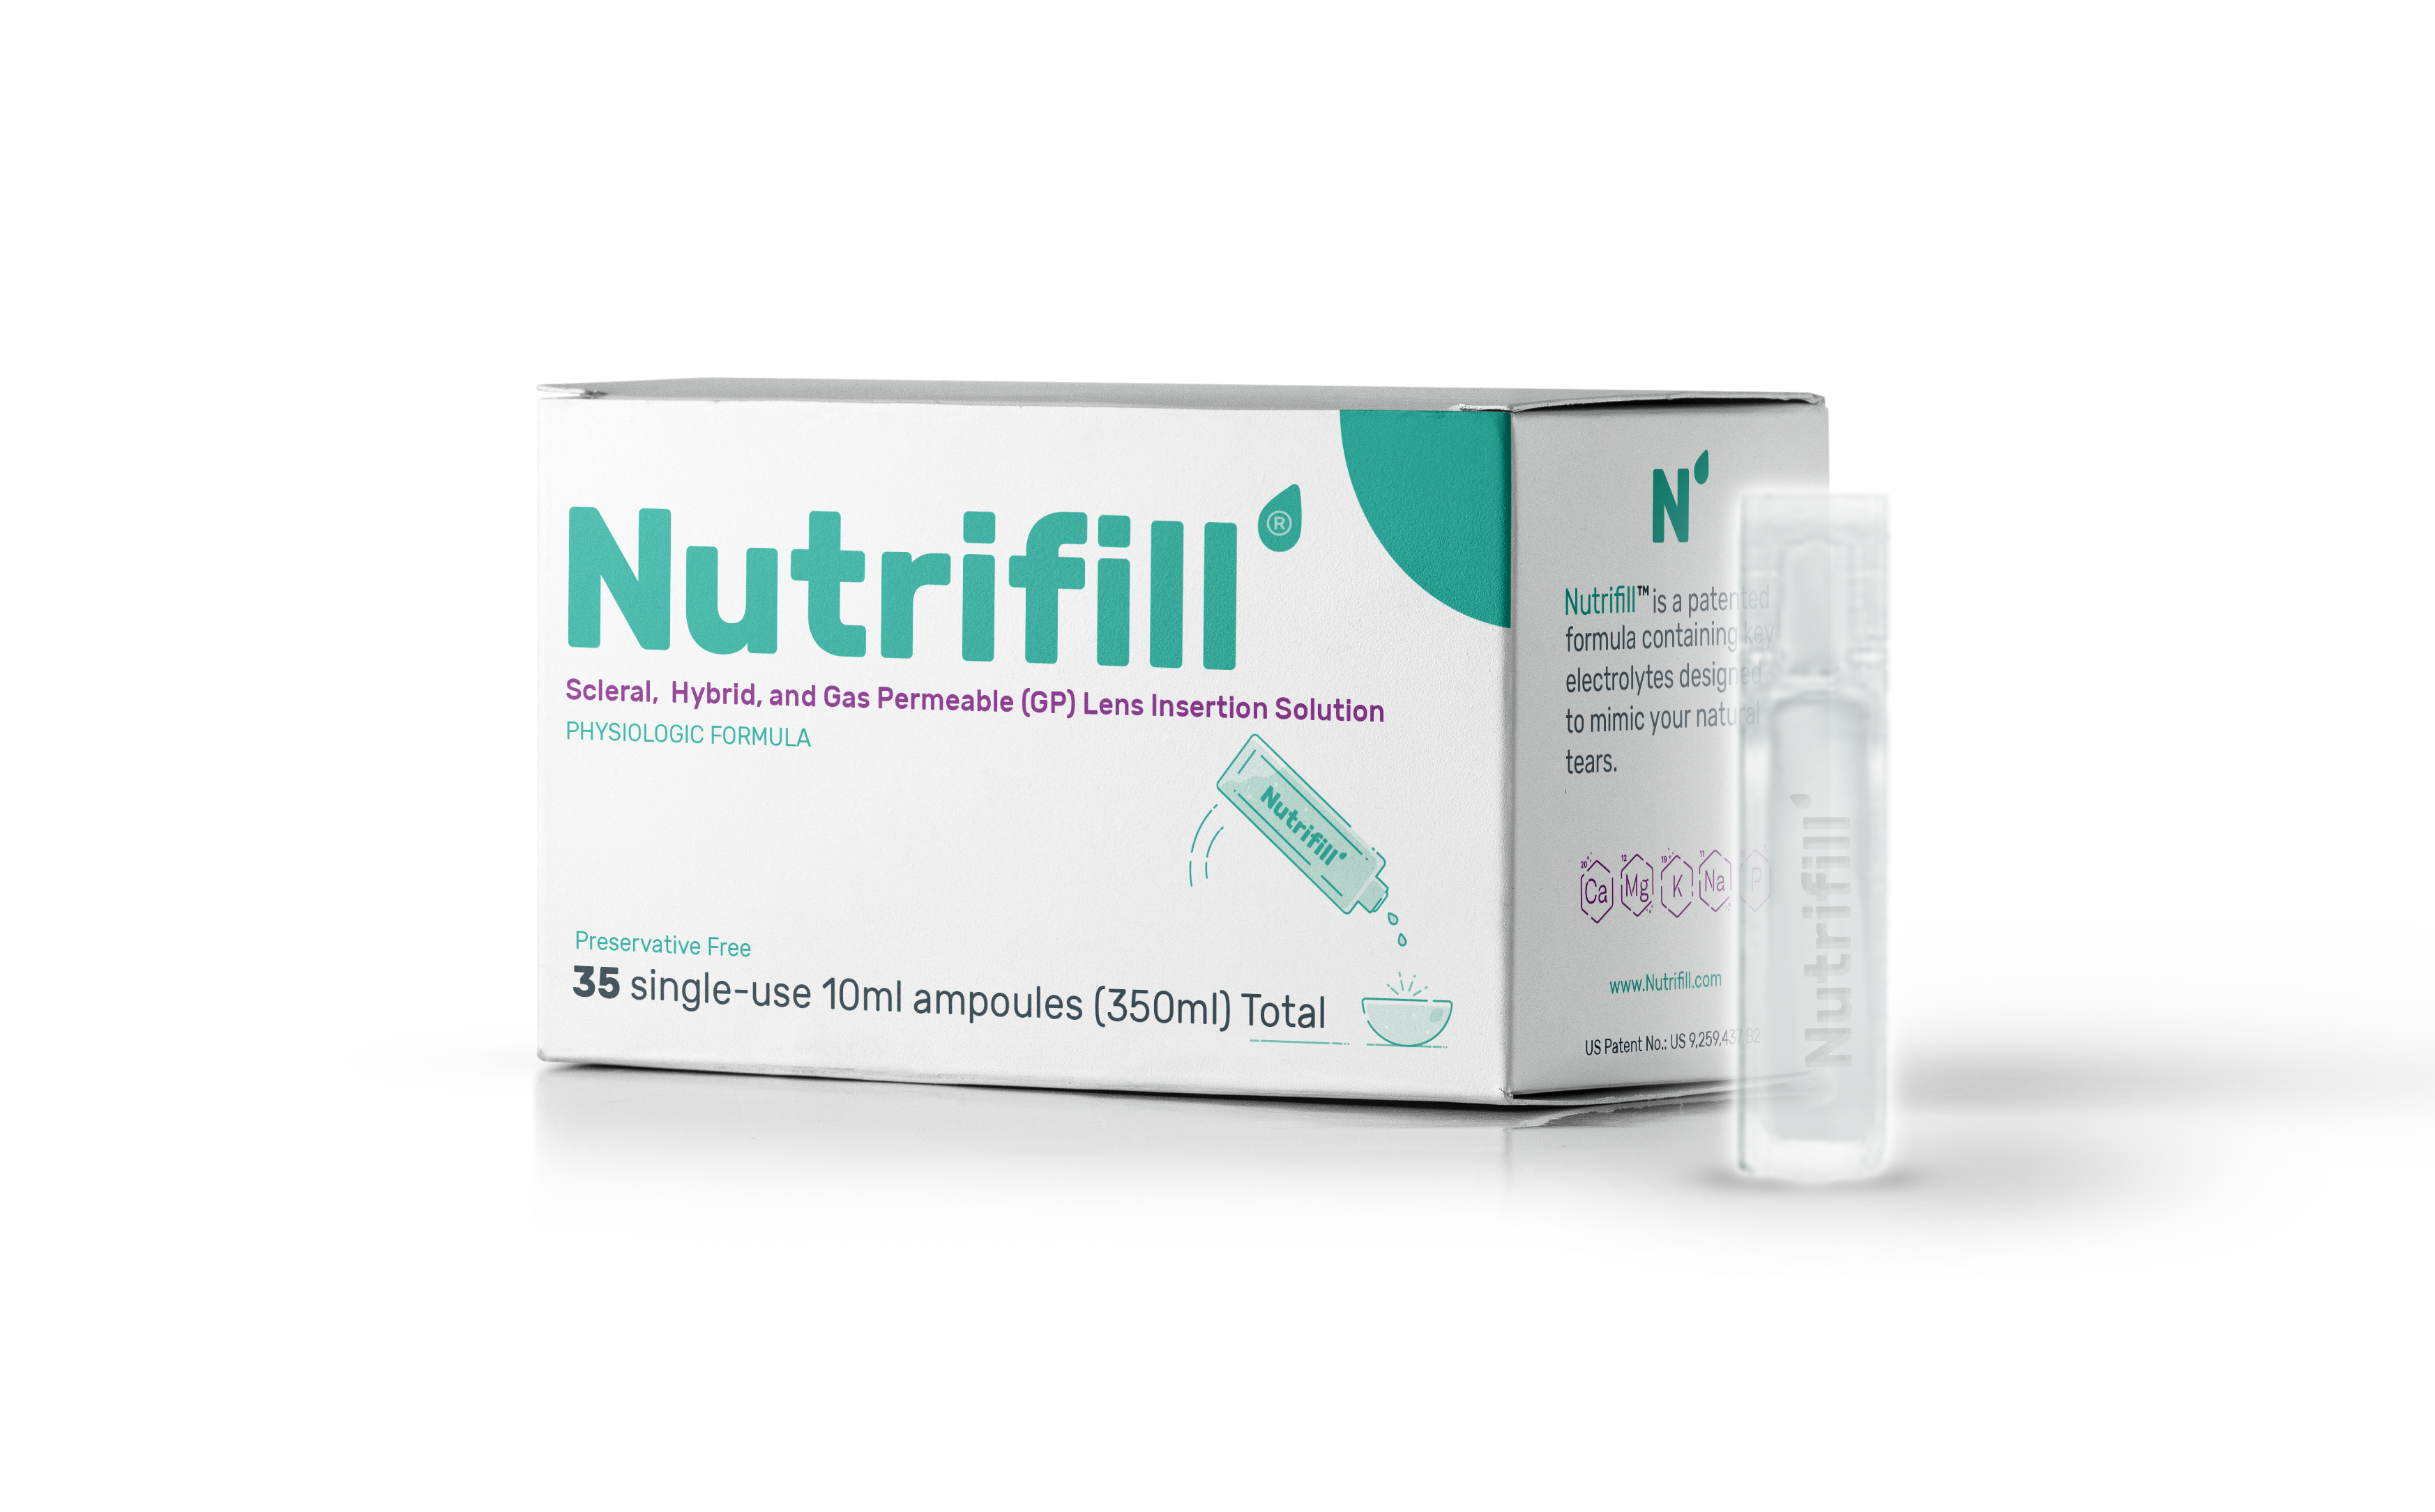 Nutrifill 1-Month Supply